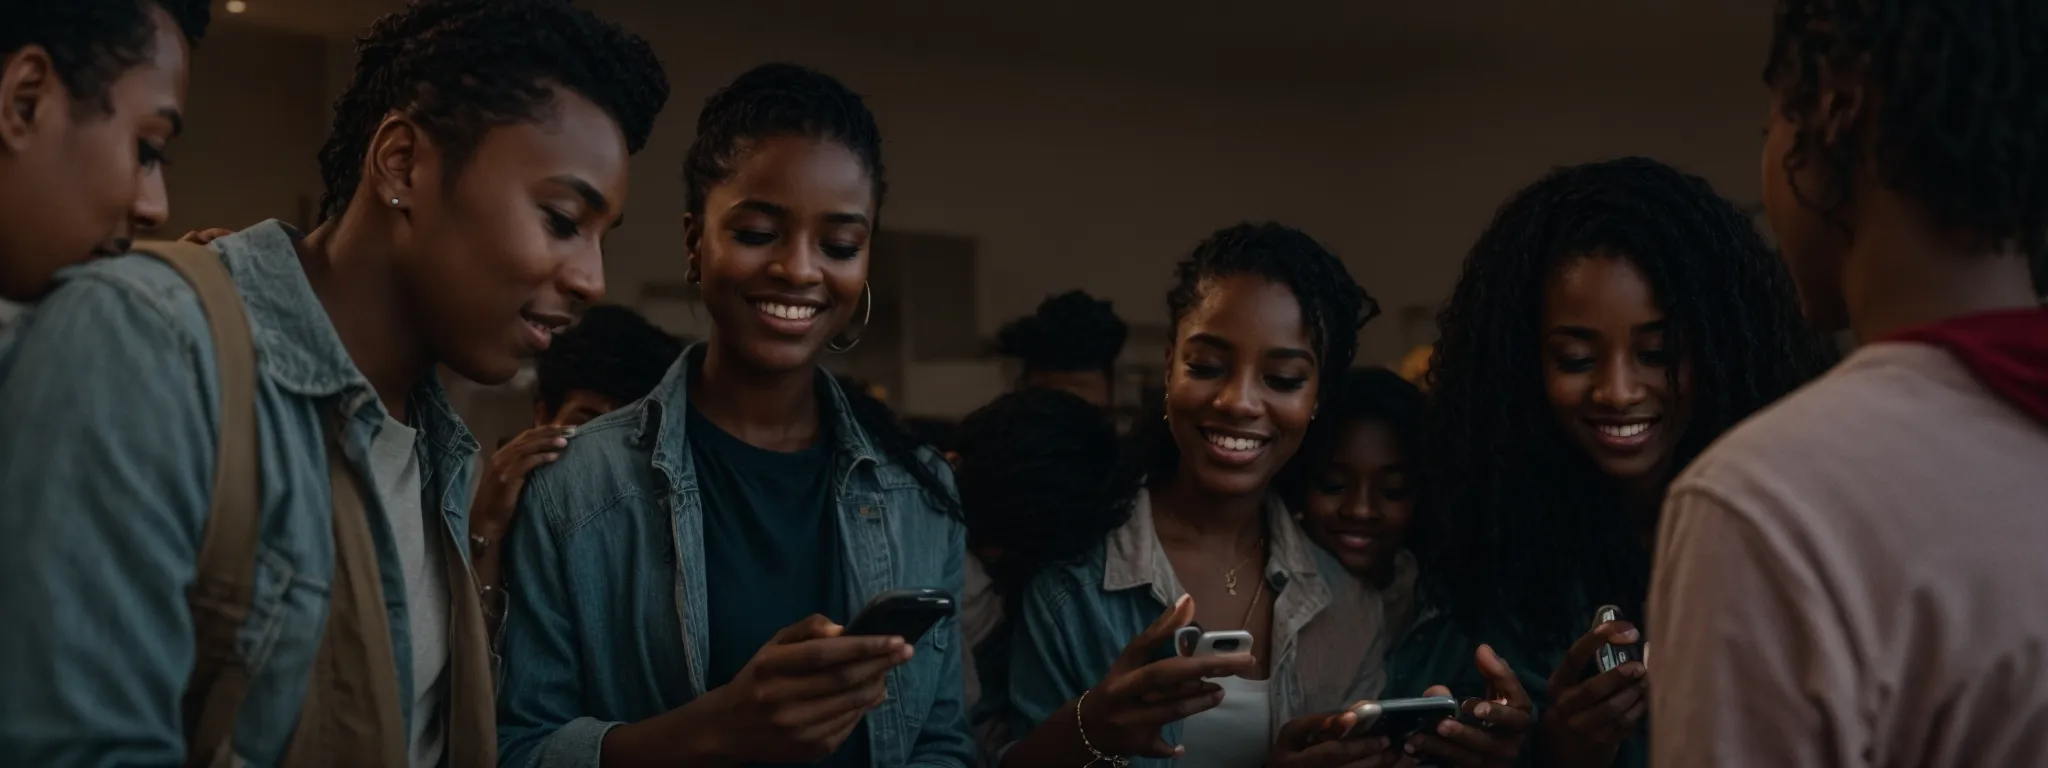 a group of diverse people excitedly looking at a smartphone screen together.